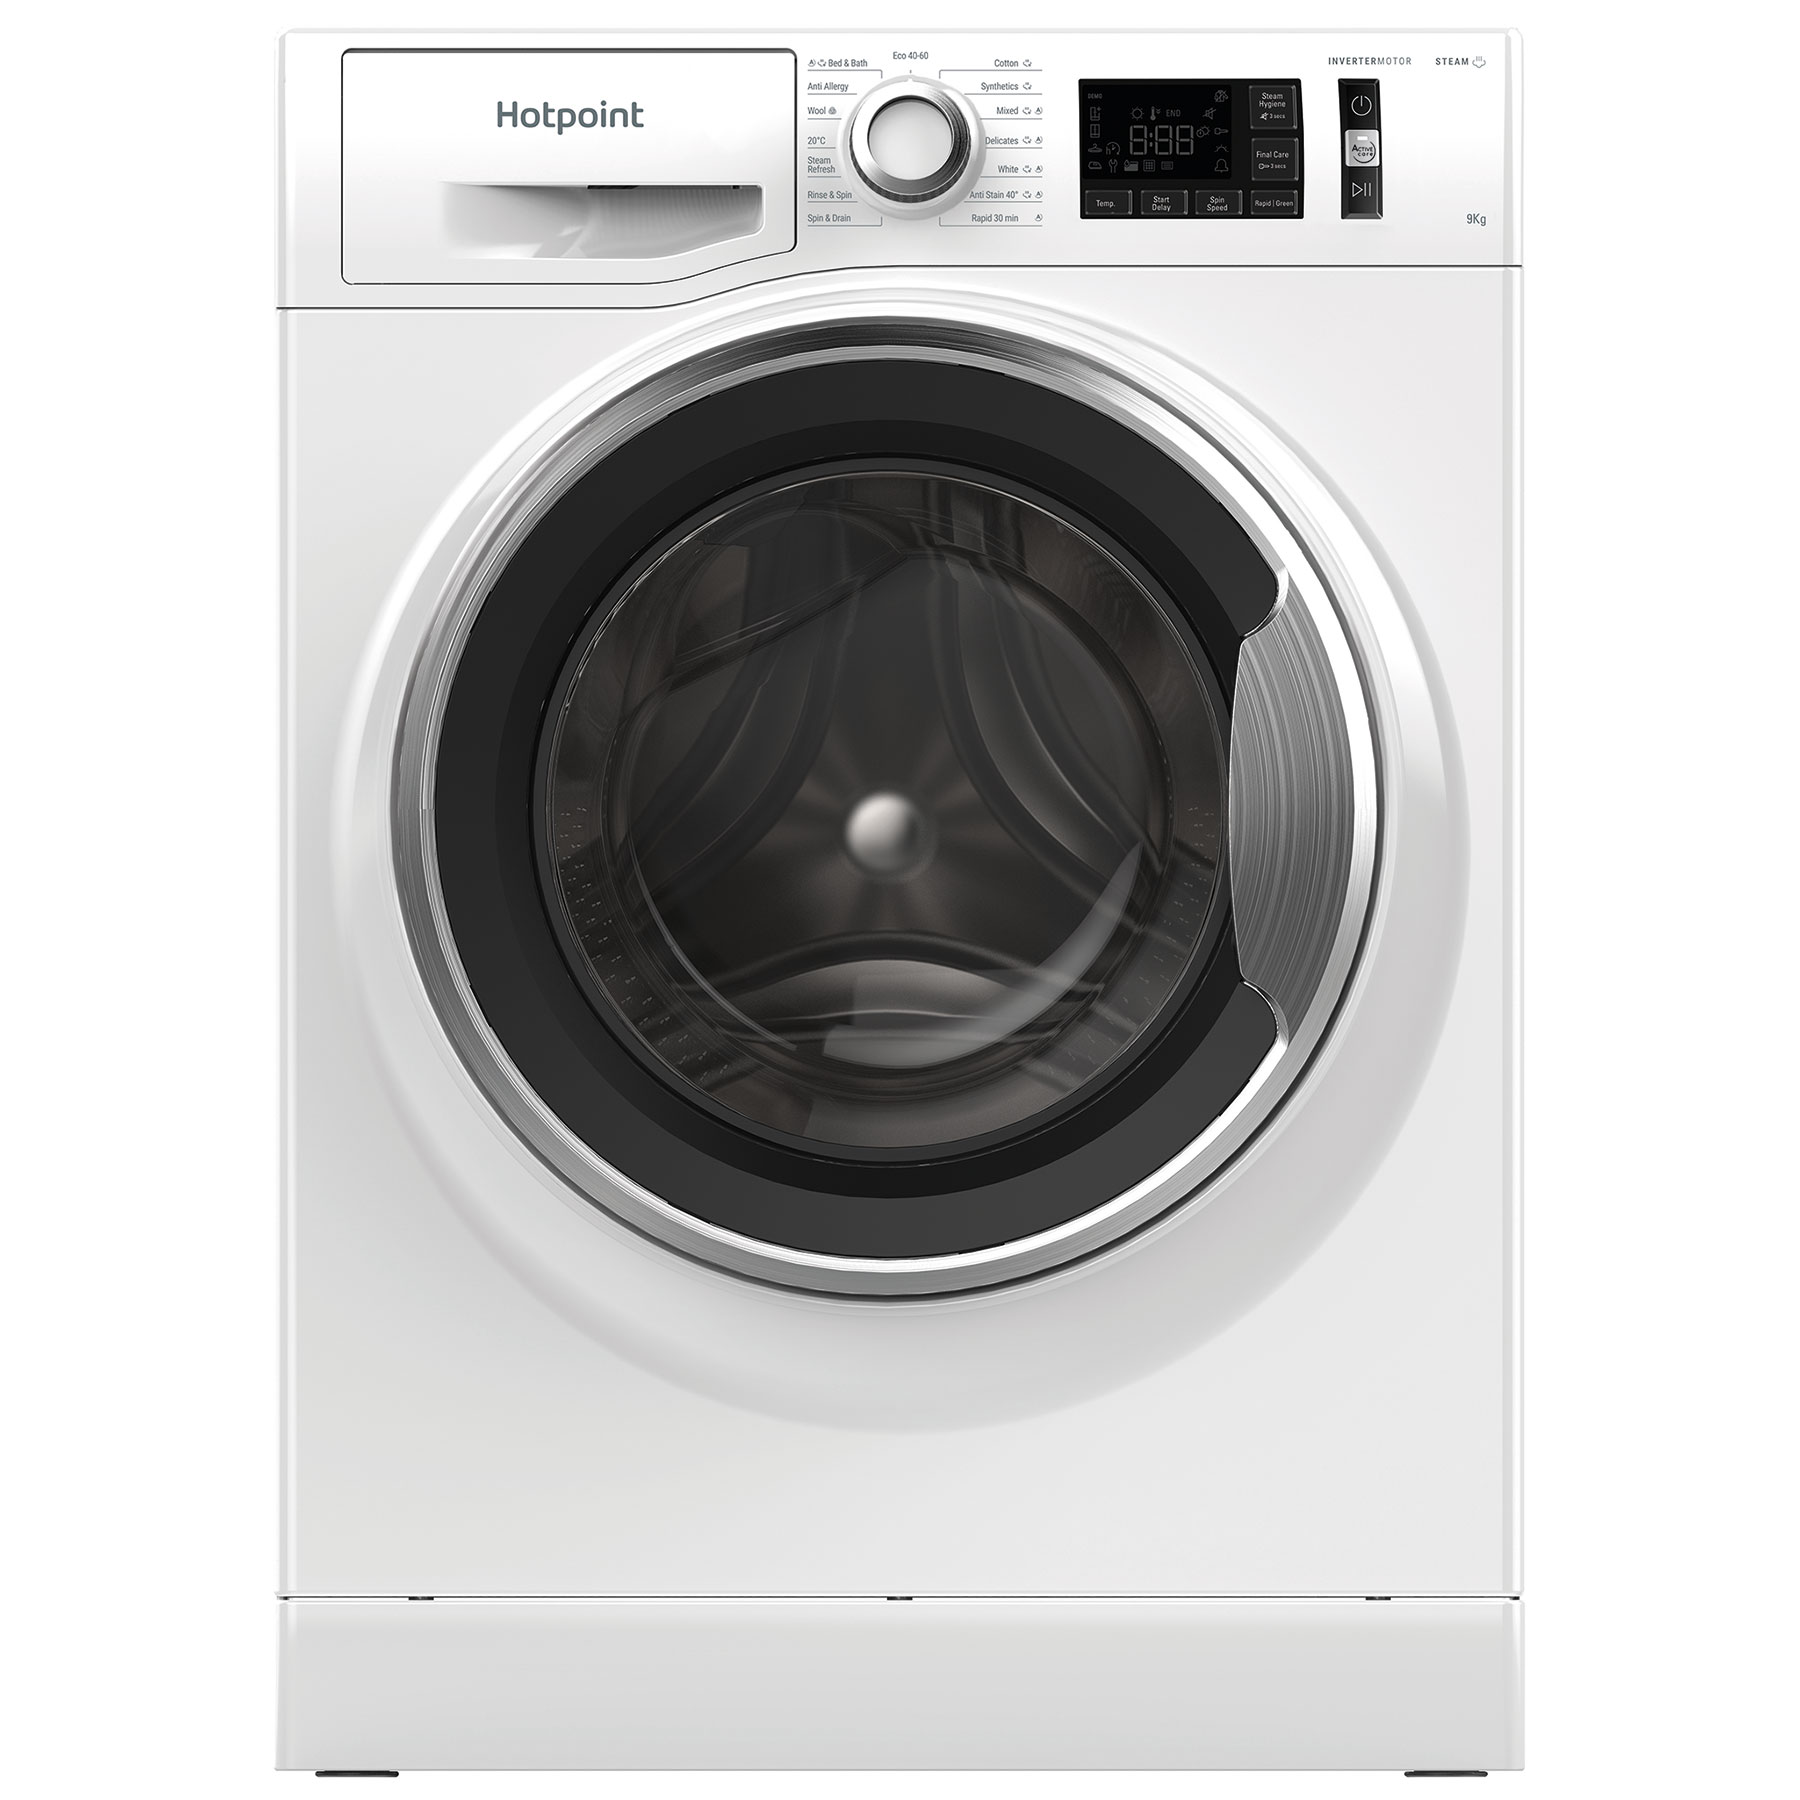 Hotpoint NM11948WCAUK Washing Machine in White 1400rpm 9Kg A Rated